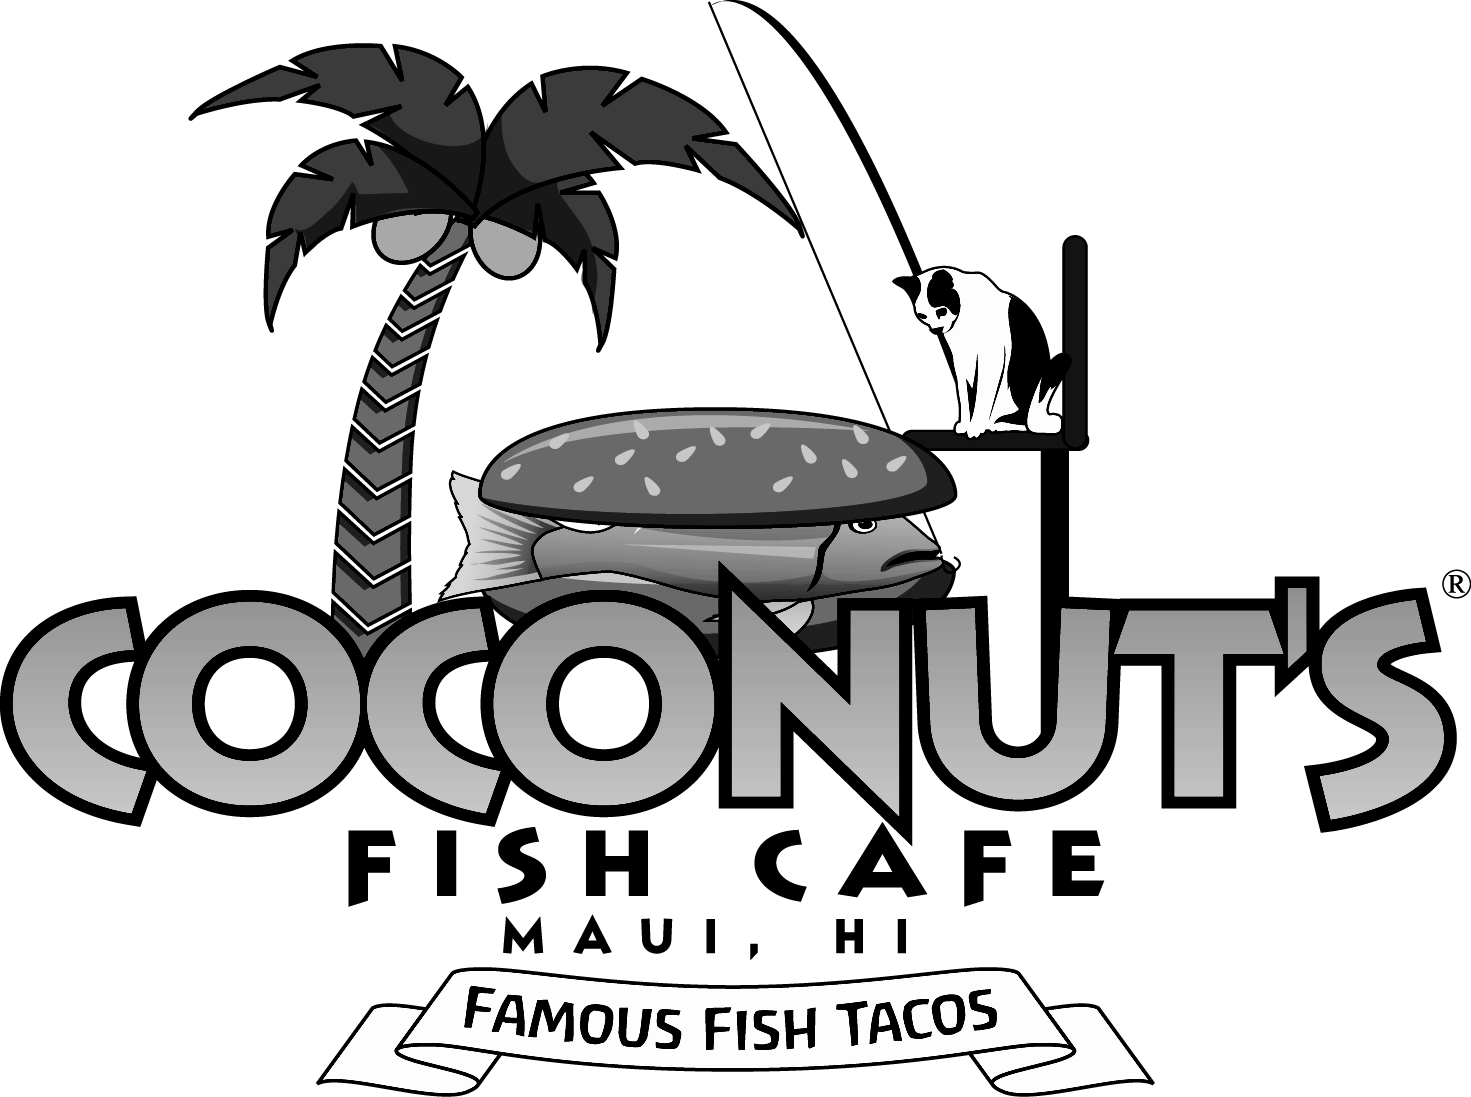 Coconut's Fish Cafe